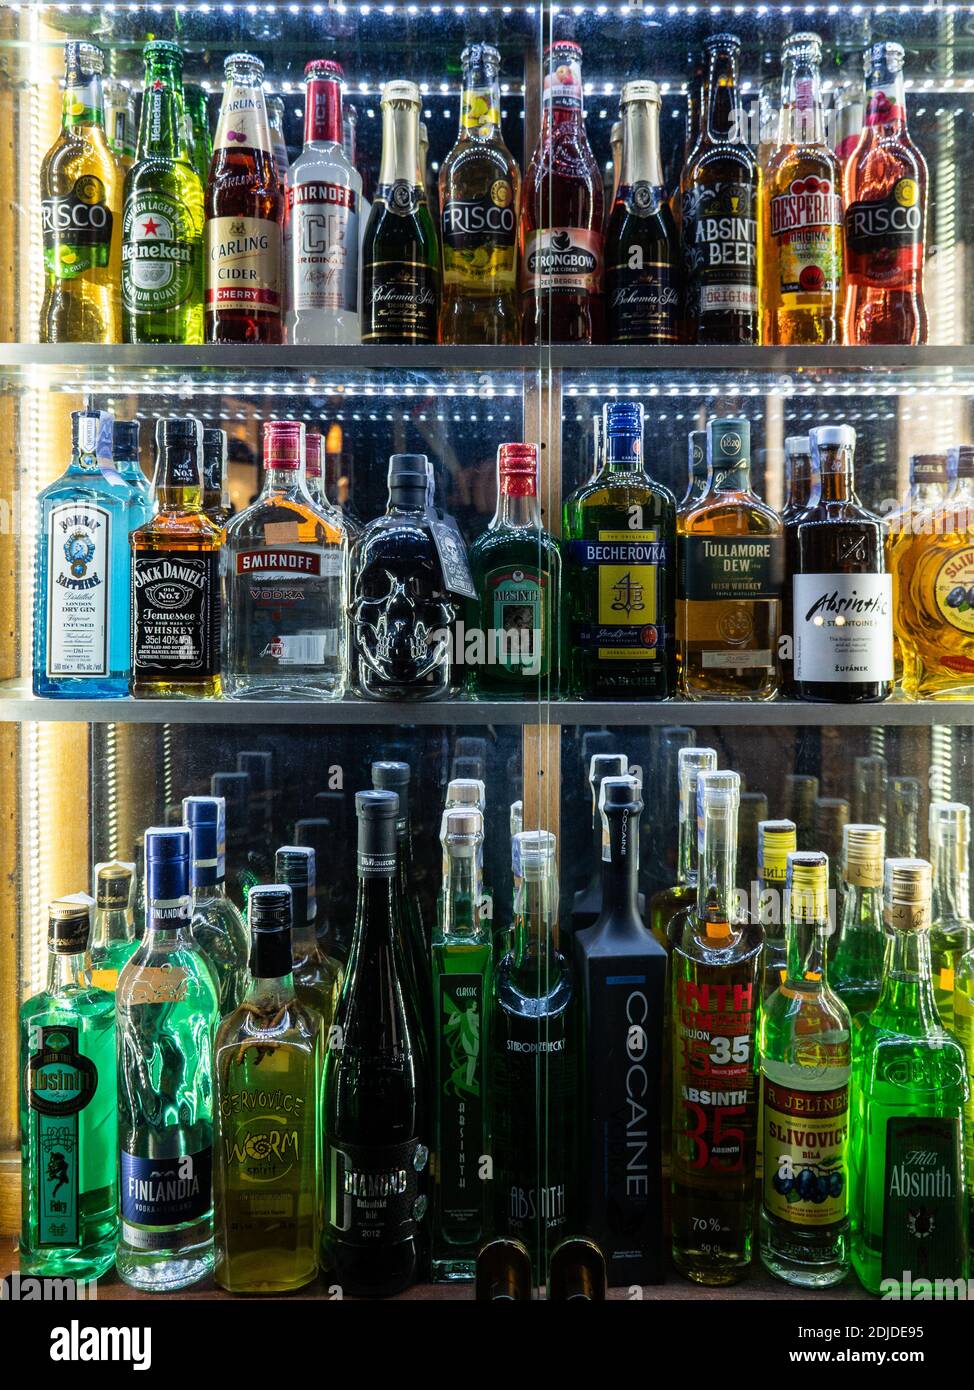 Spirit bottles on display. A shop window of an absinthe shop in central Prague with some unusual alcoholic drinks available. Stock Photo